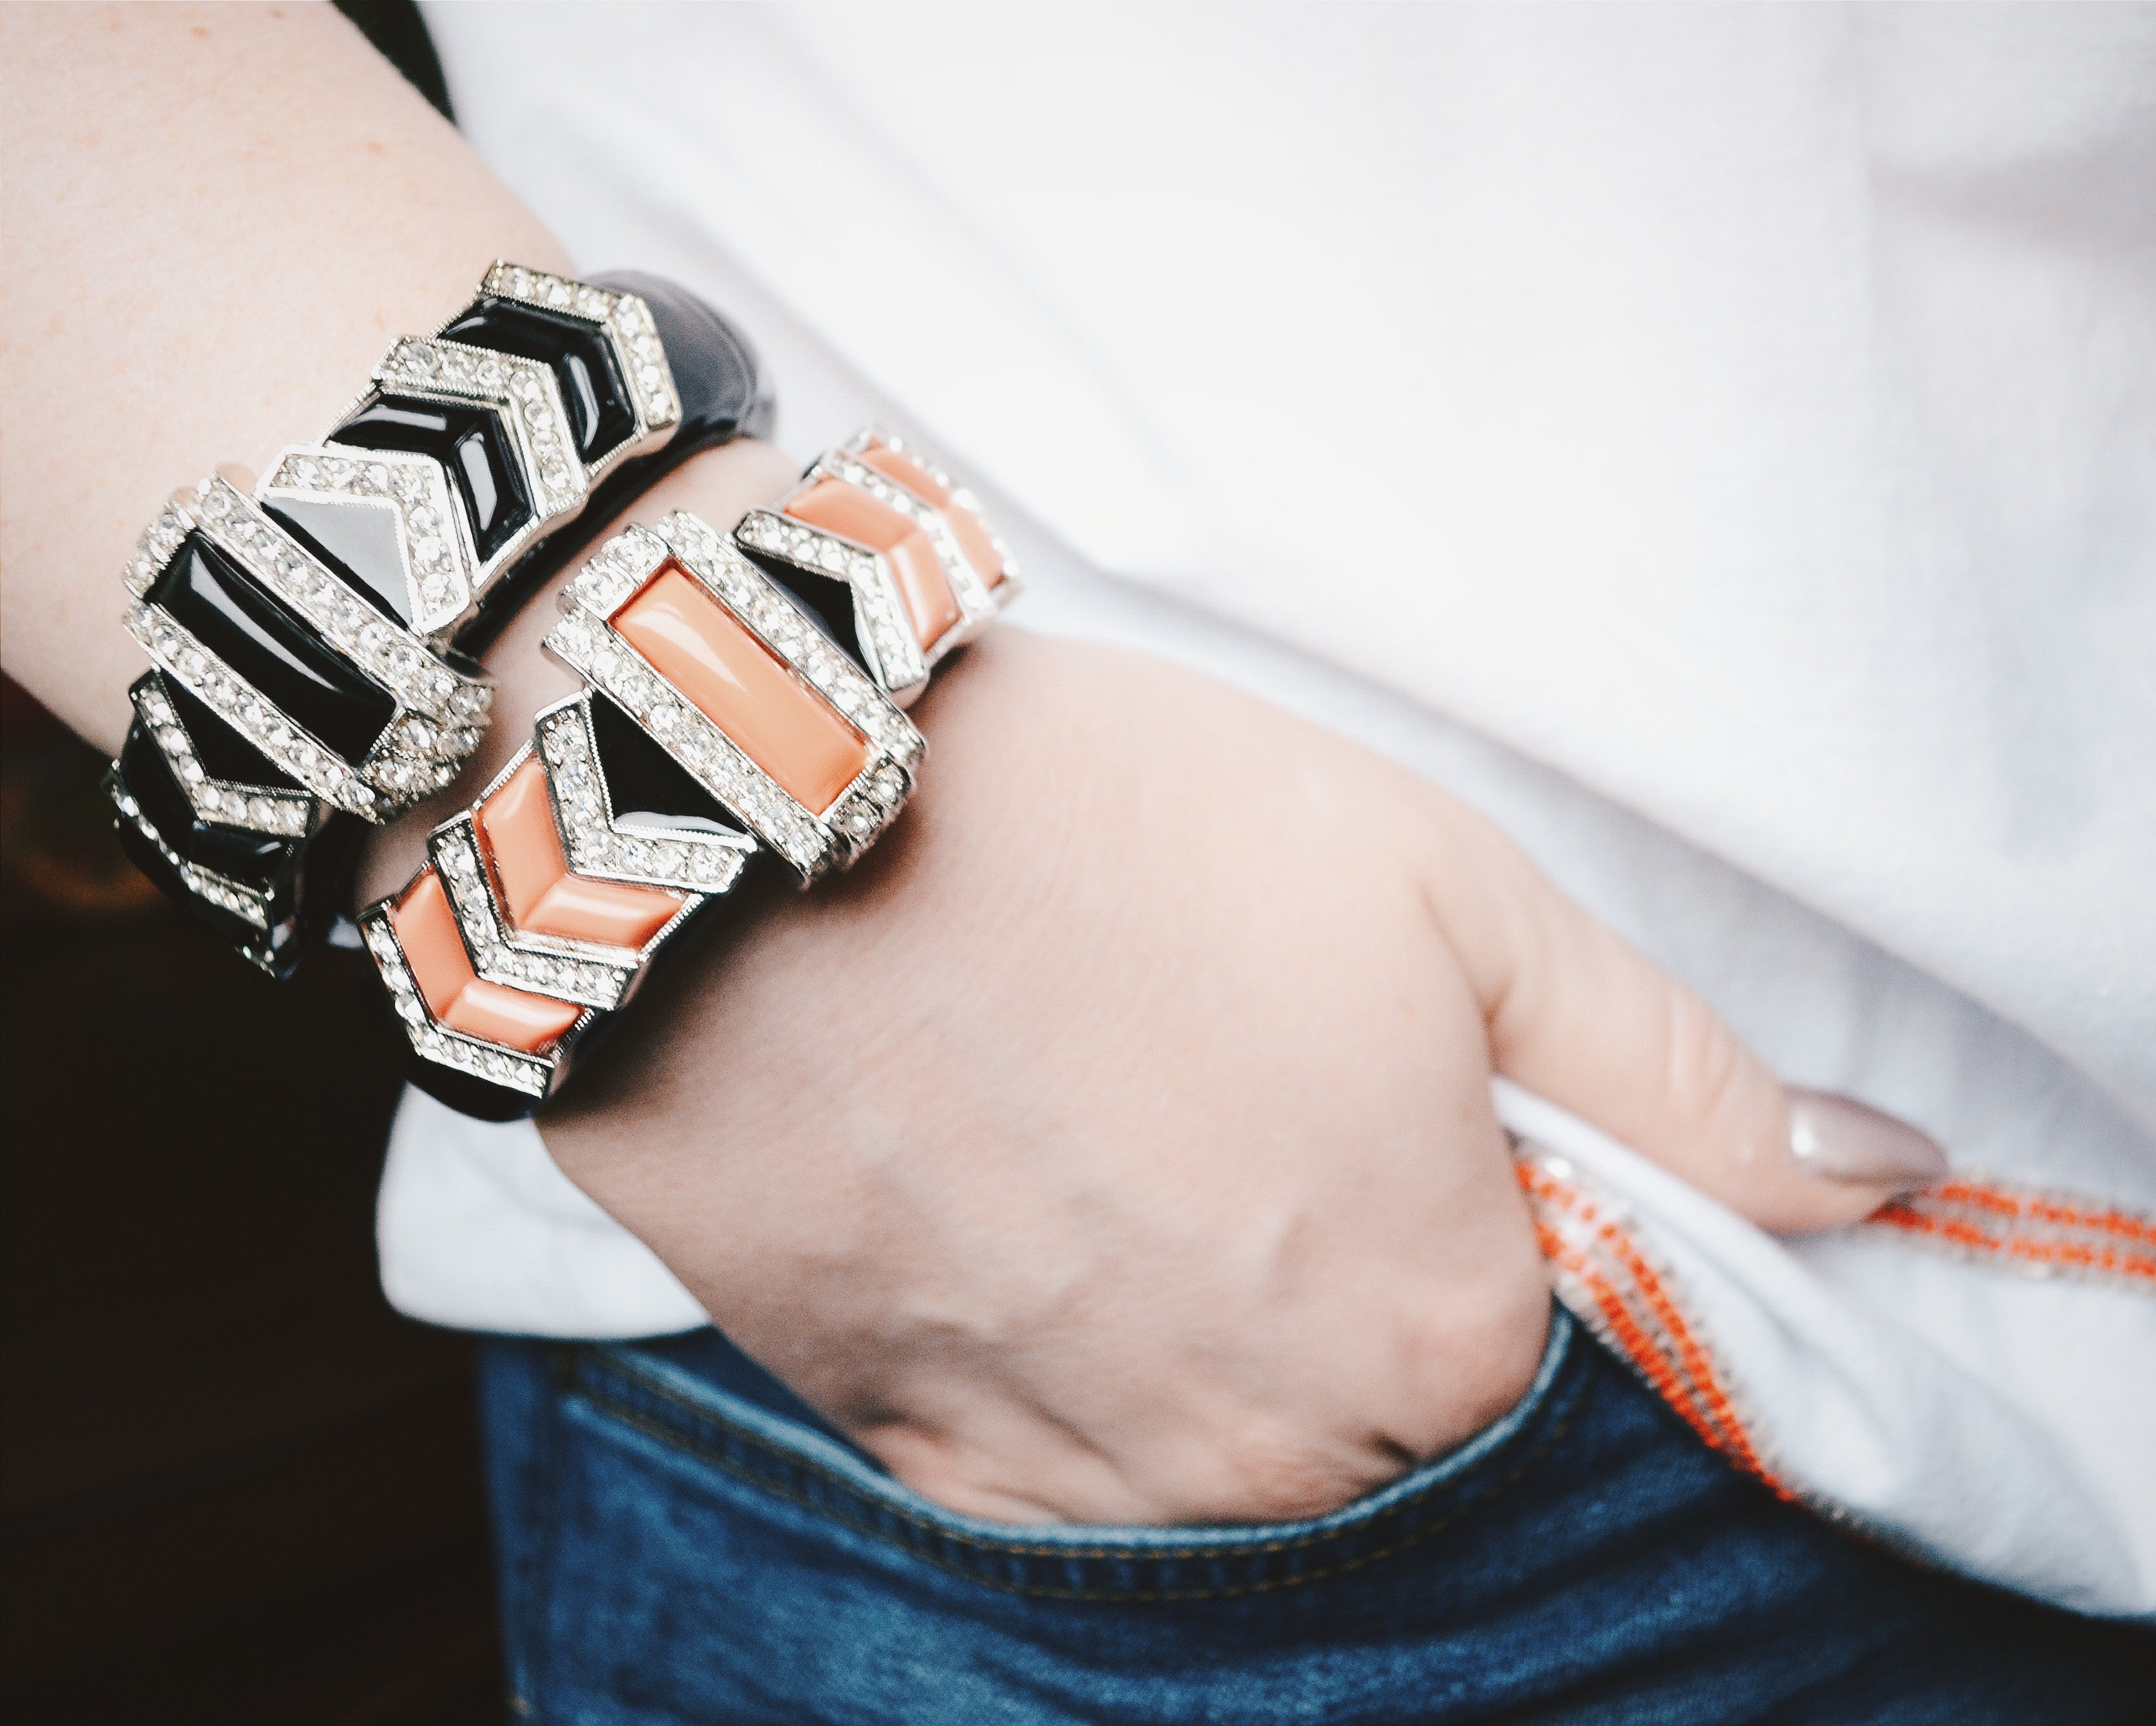 how to style bracelets, mixing vintage with modern, vintage bracelets, stacking bracelets